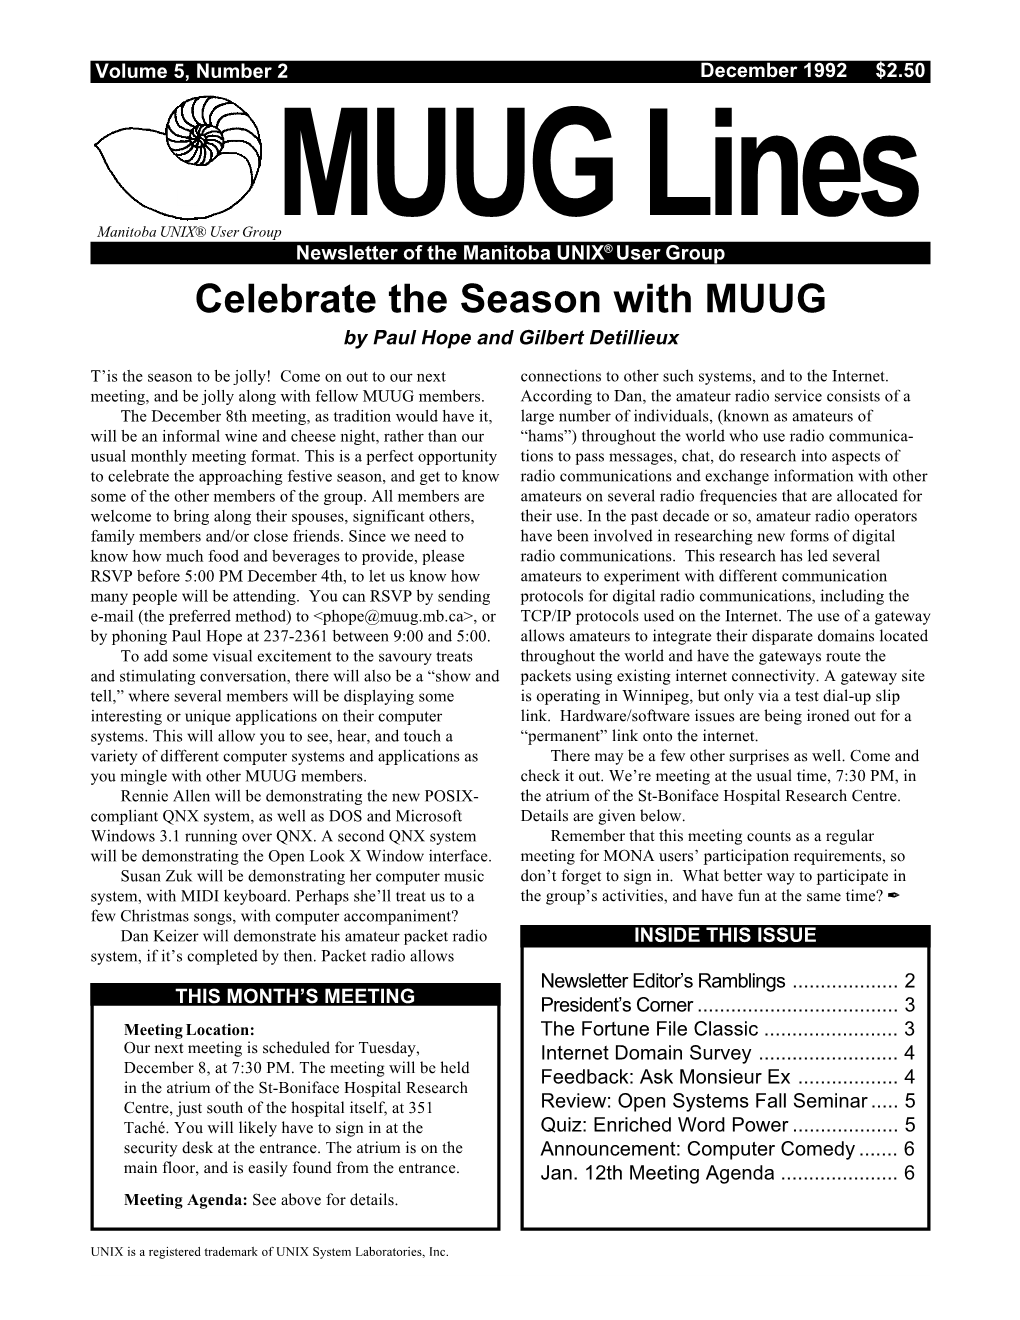 Celebrate the Season with MUUG by Paul Hope and Gilbert Detillieux